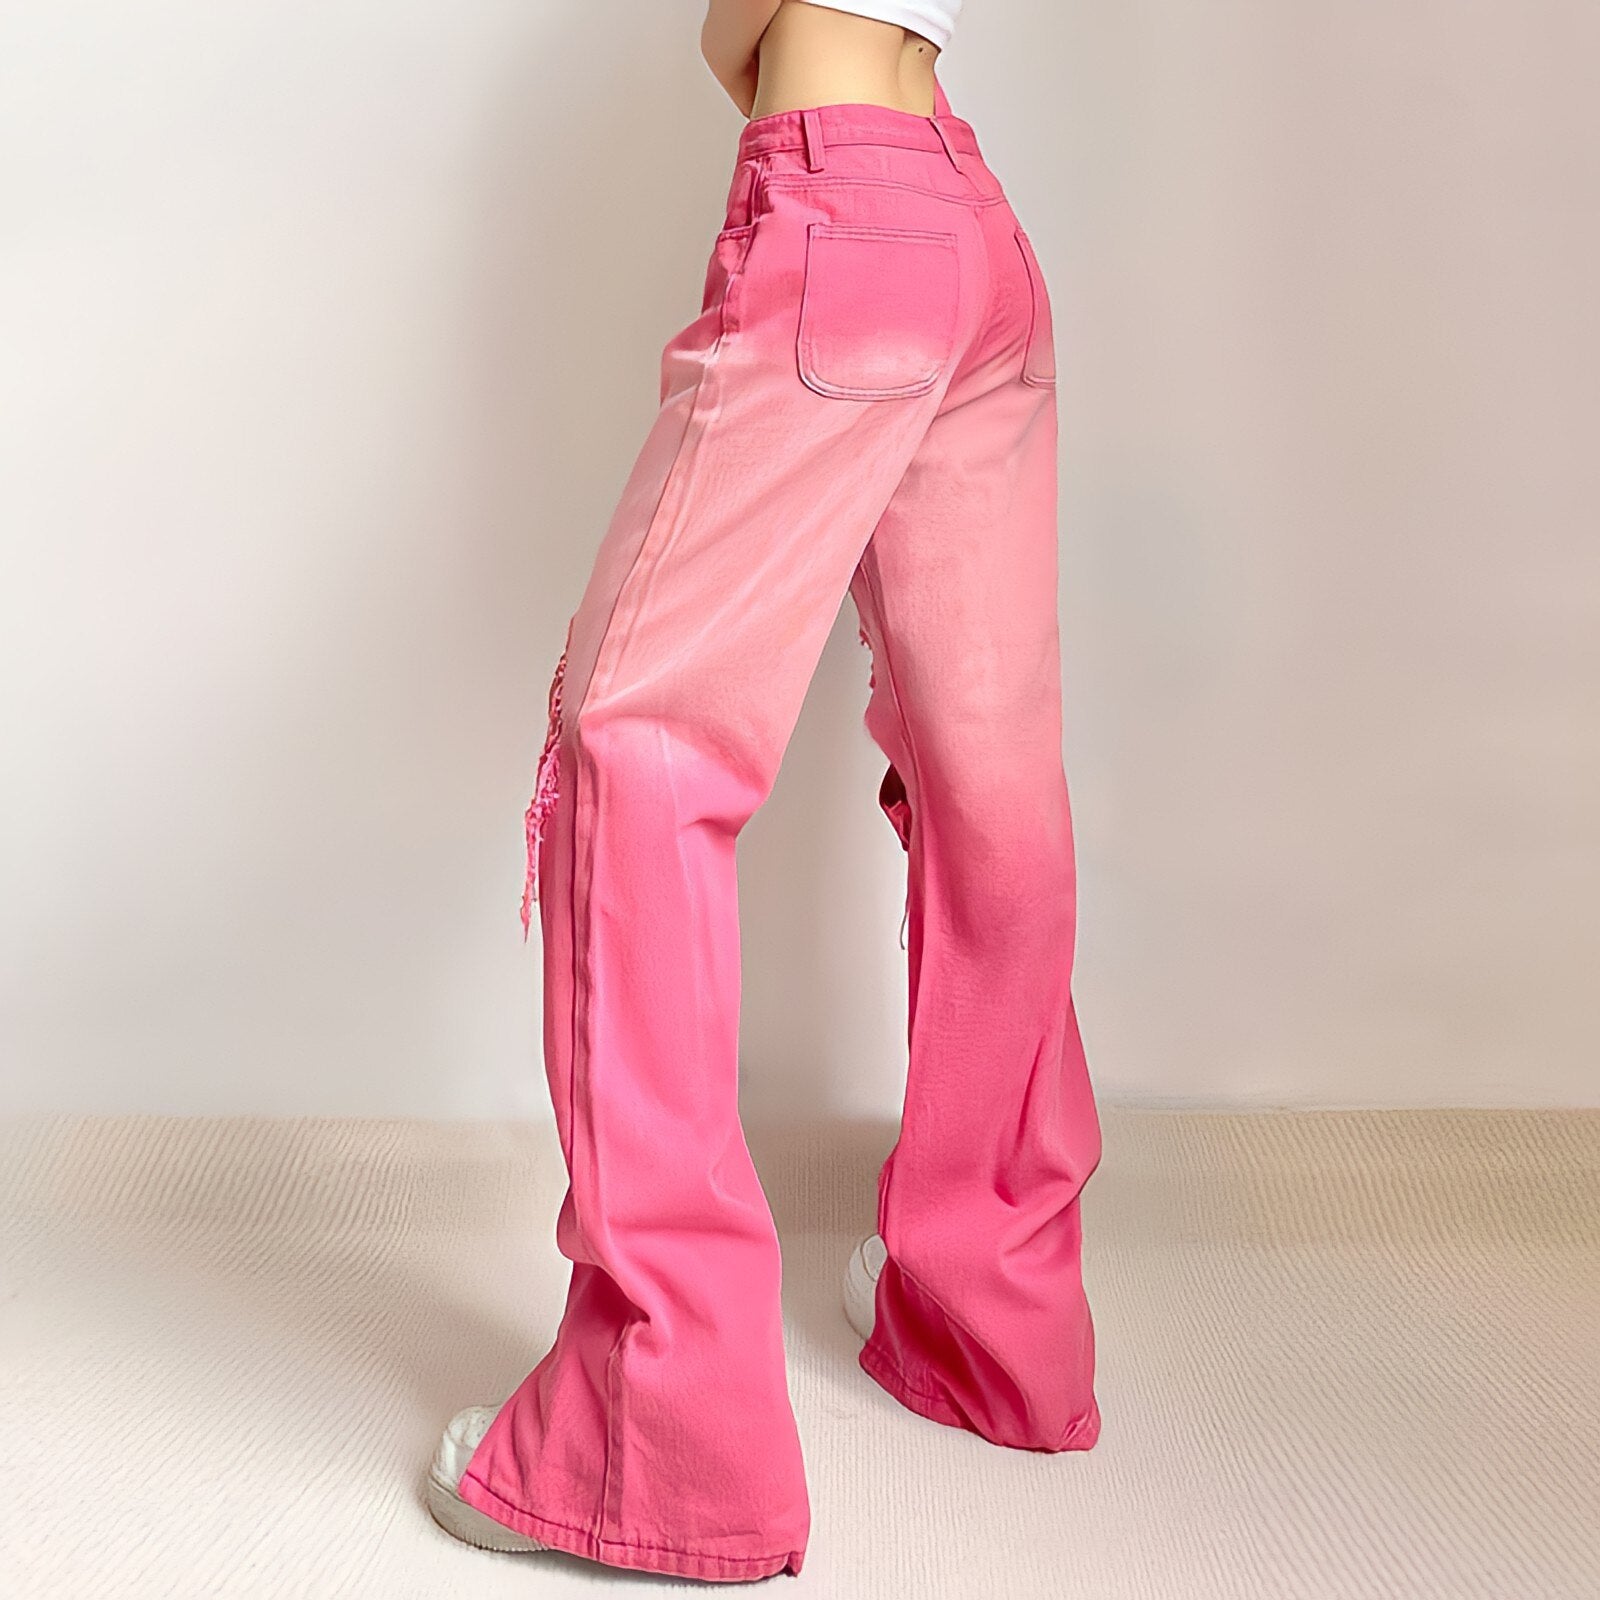 Pink Flared Jeans Womens High Waist Korean Fashion American Style Streetwear Y2k Ripped Trousers Casual Straight Wide Leg Pants